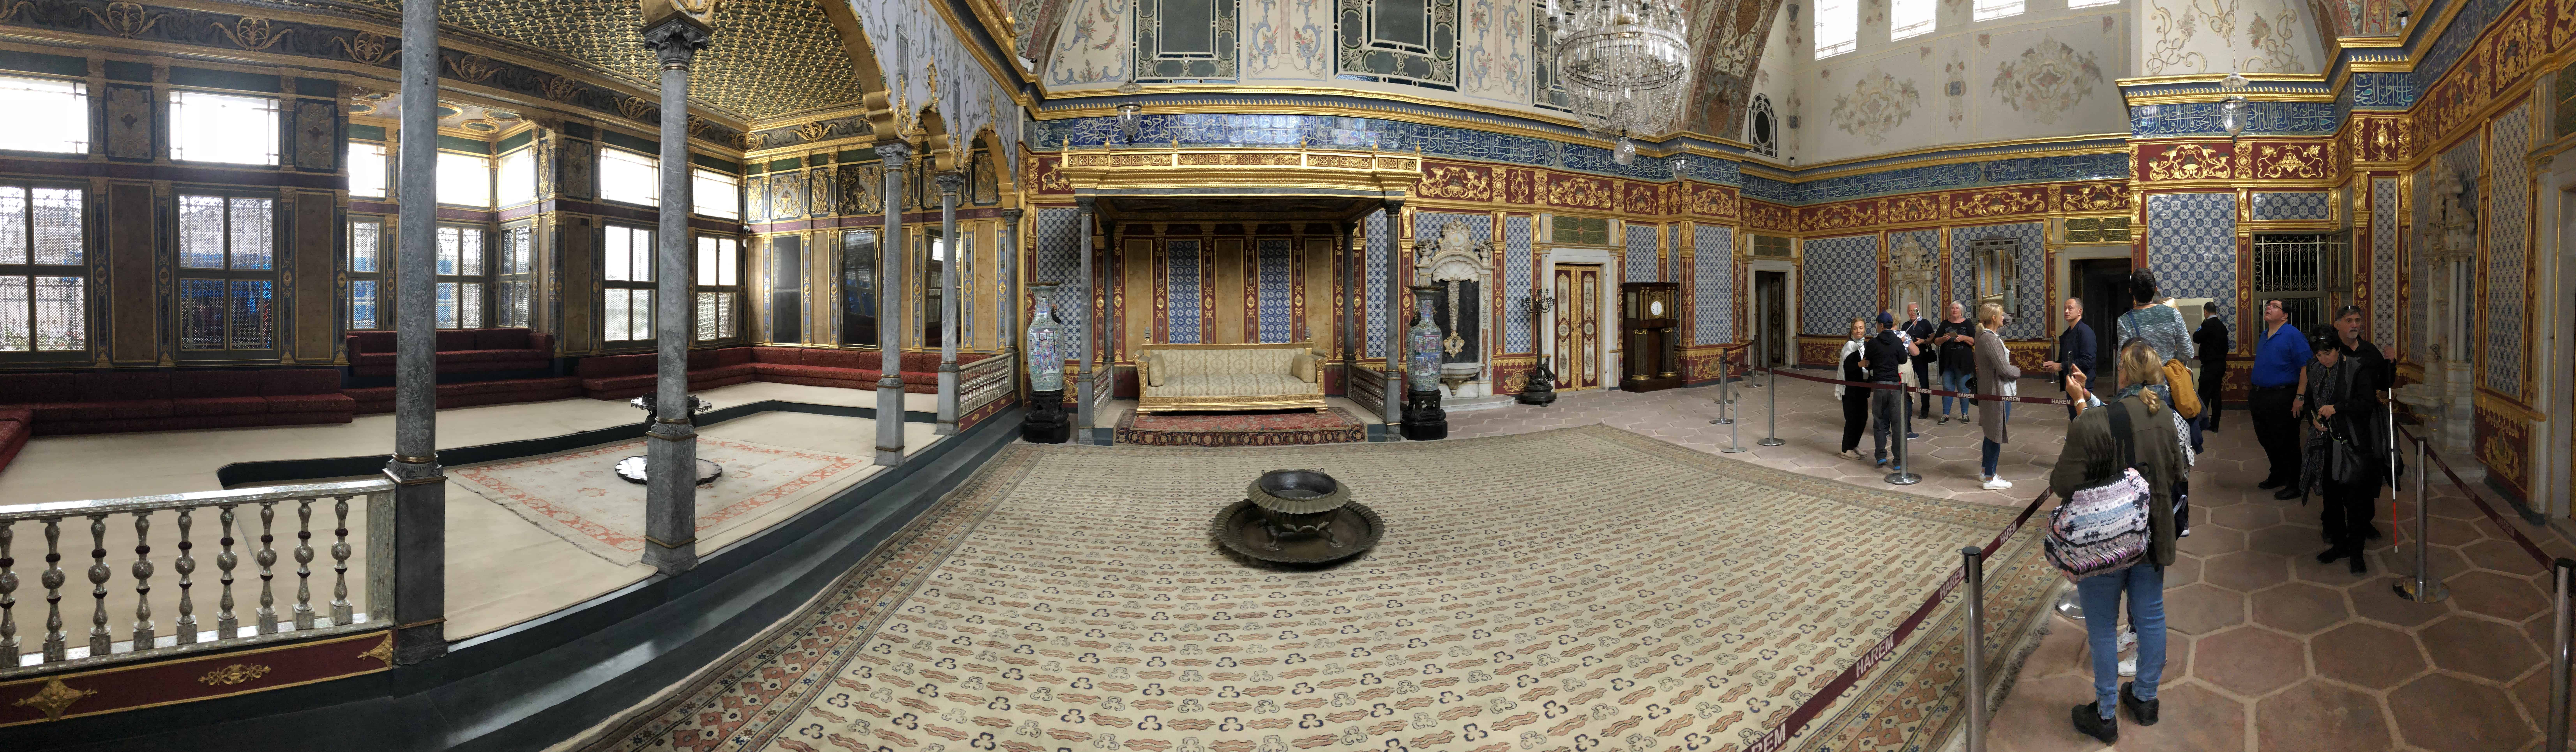 Imperial Hall in the Imperial Harem at Topkapi Palace in Istanbul, Turkey